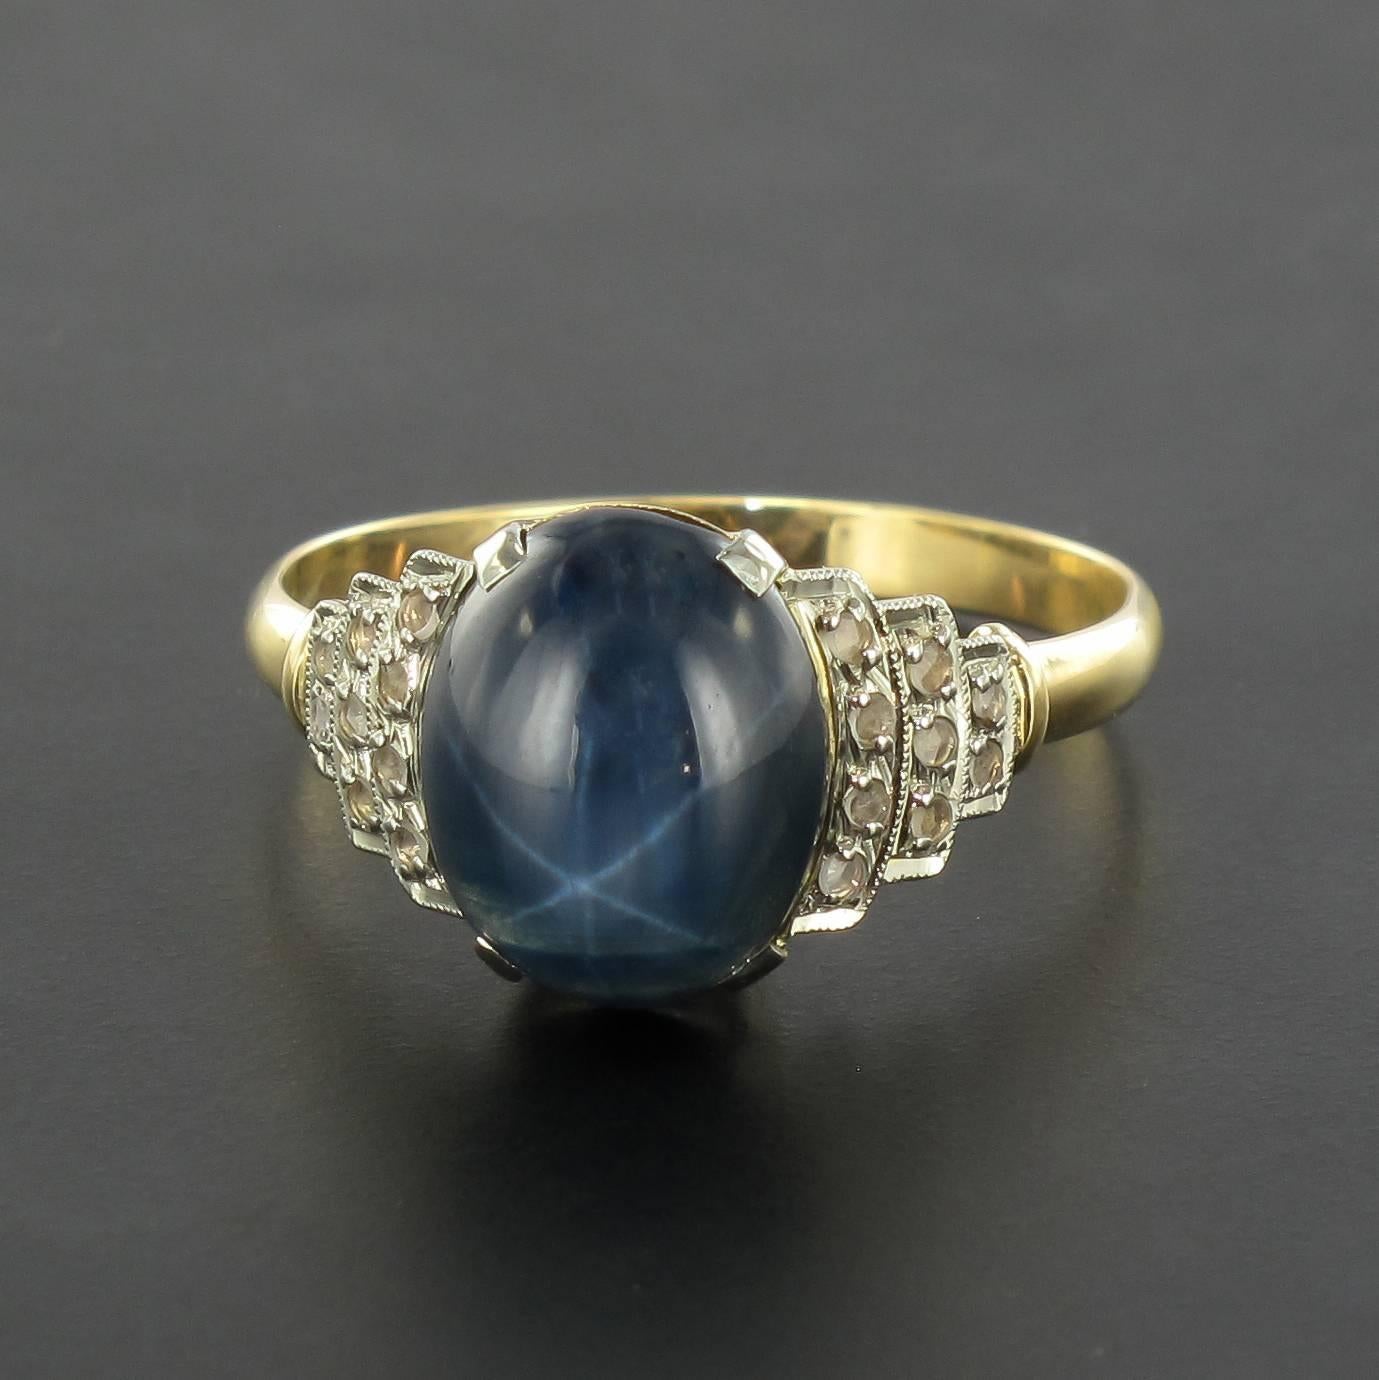 Ring in 18 Karat yellow gold, eagle head hallmark. 
This gorgeous Art Deco style ring is claw set with an oval star sapphire cabochon that is accentuated by rose cut diamonds on each side in a geometric setting. 
Weight of the sapphire: 3.31 carats